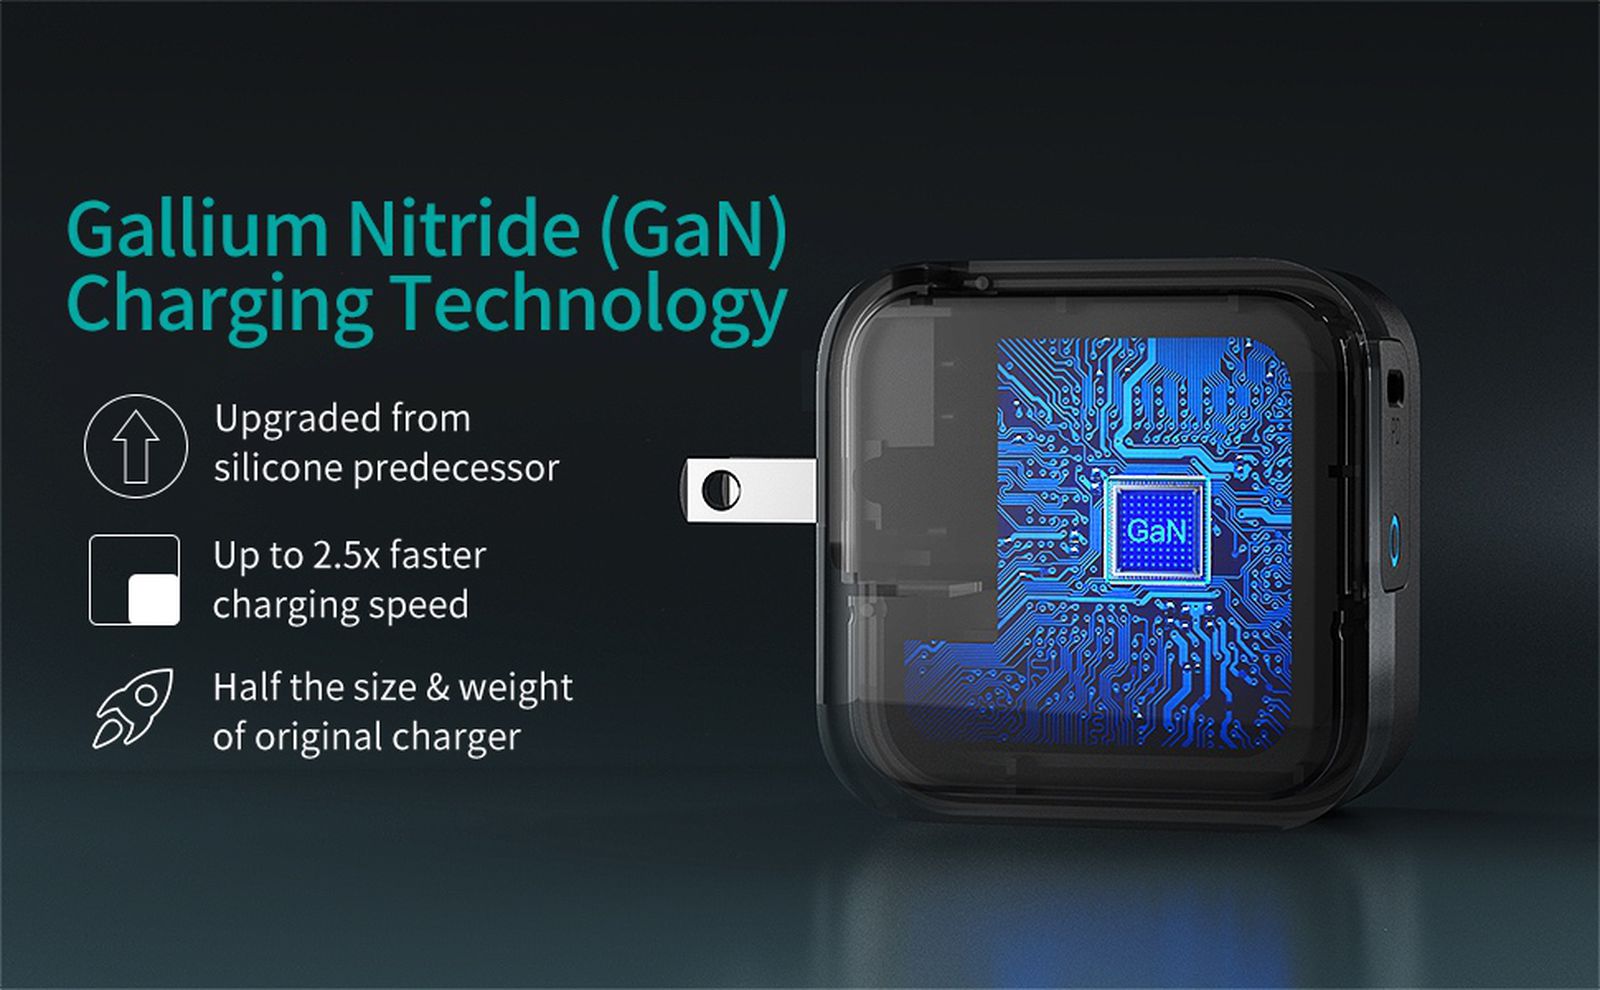 GaN Chargers